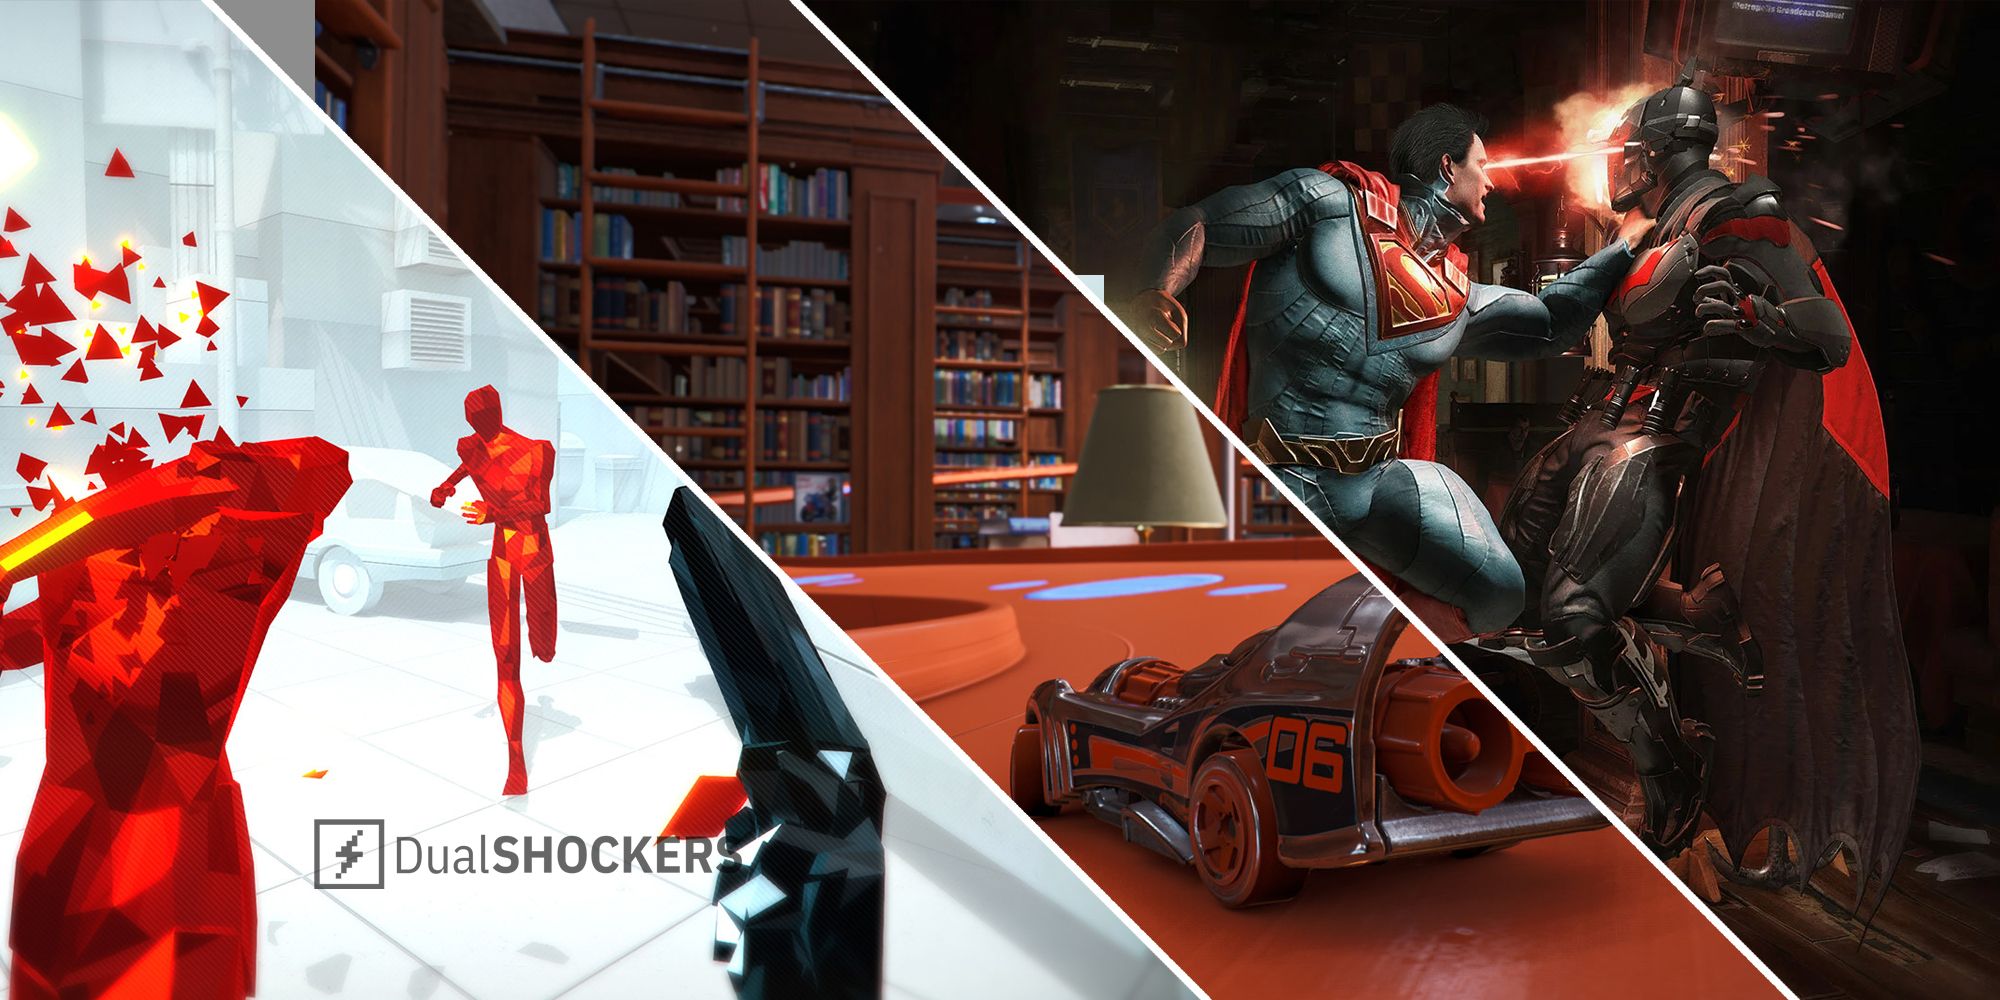 PlayStation Plus Monthly Games for October: Hot Wheels Unleashed, Injustice  2, Superhot – PlayStation.Blog